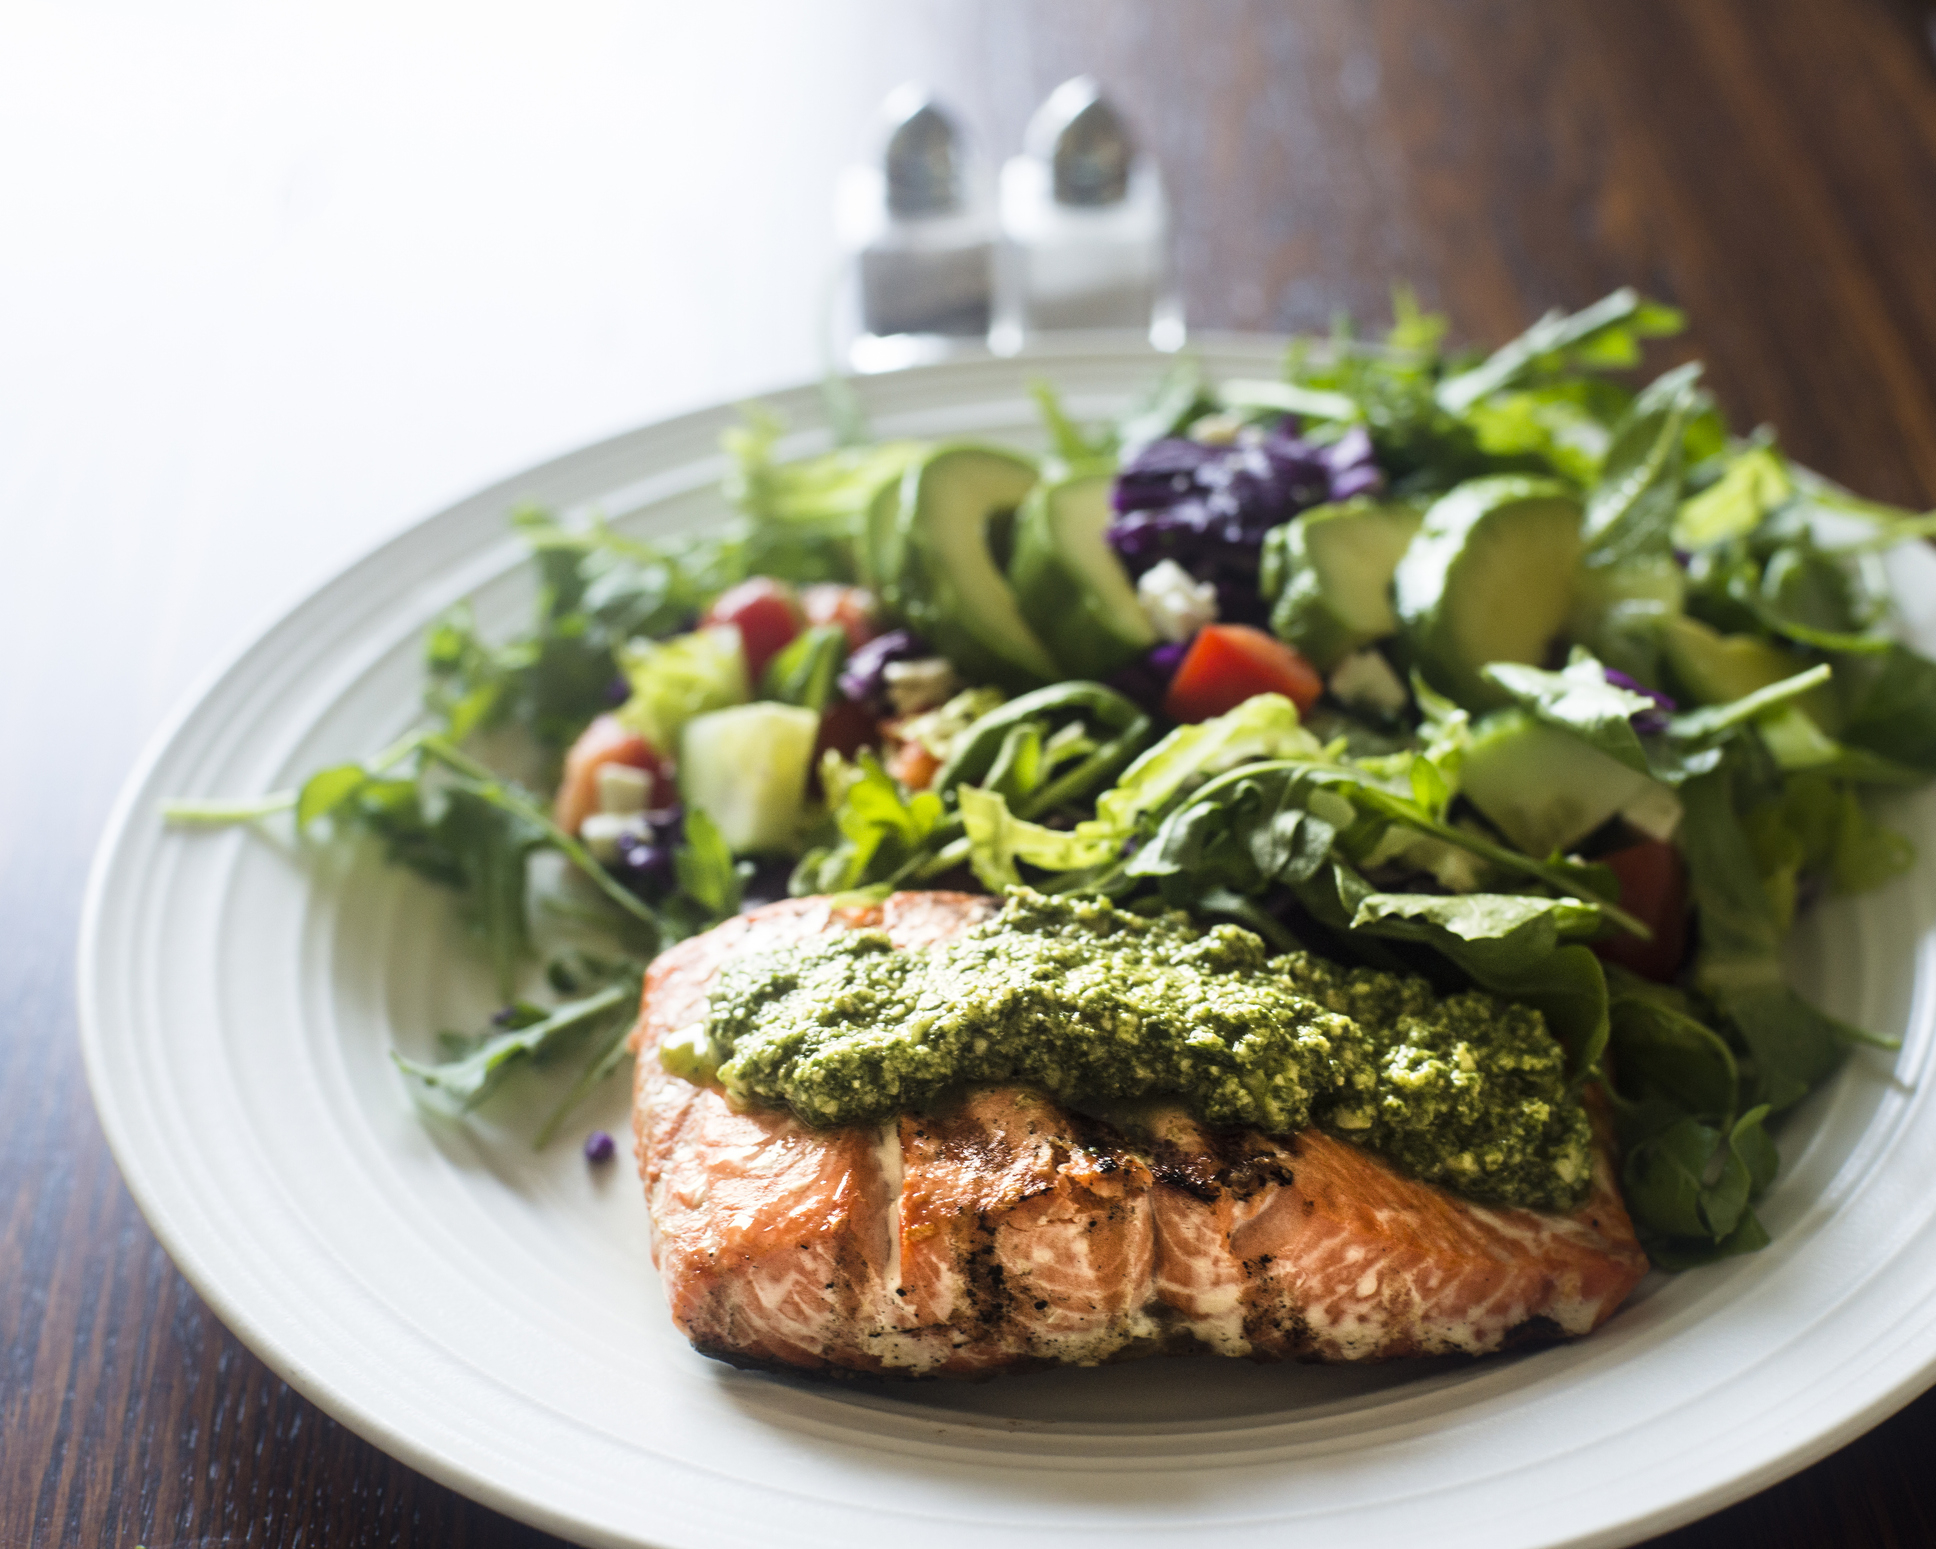 Close up of a healthy home-cooked meal on a plate which includes a grilled salmon fillet topped with arugula pesto accompanied by a green salad with avocado, romaine lettuce, cucumber, tomatoes, carrots and red cabbage